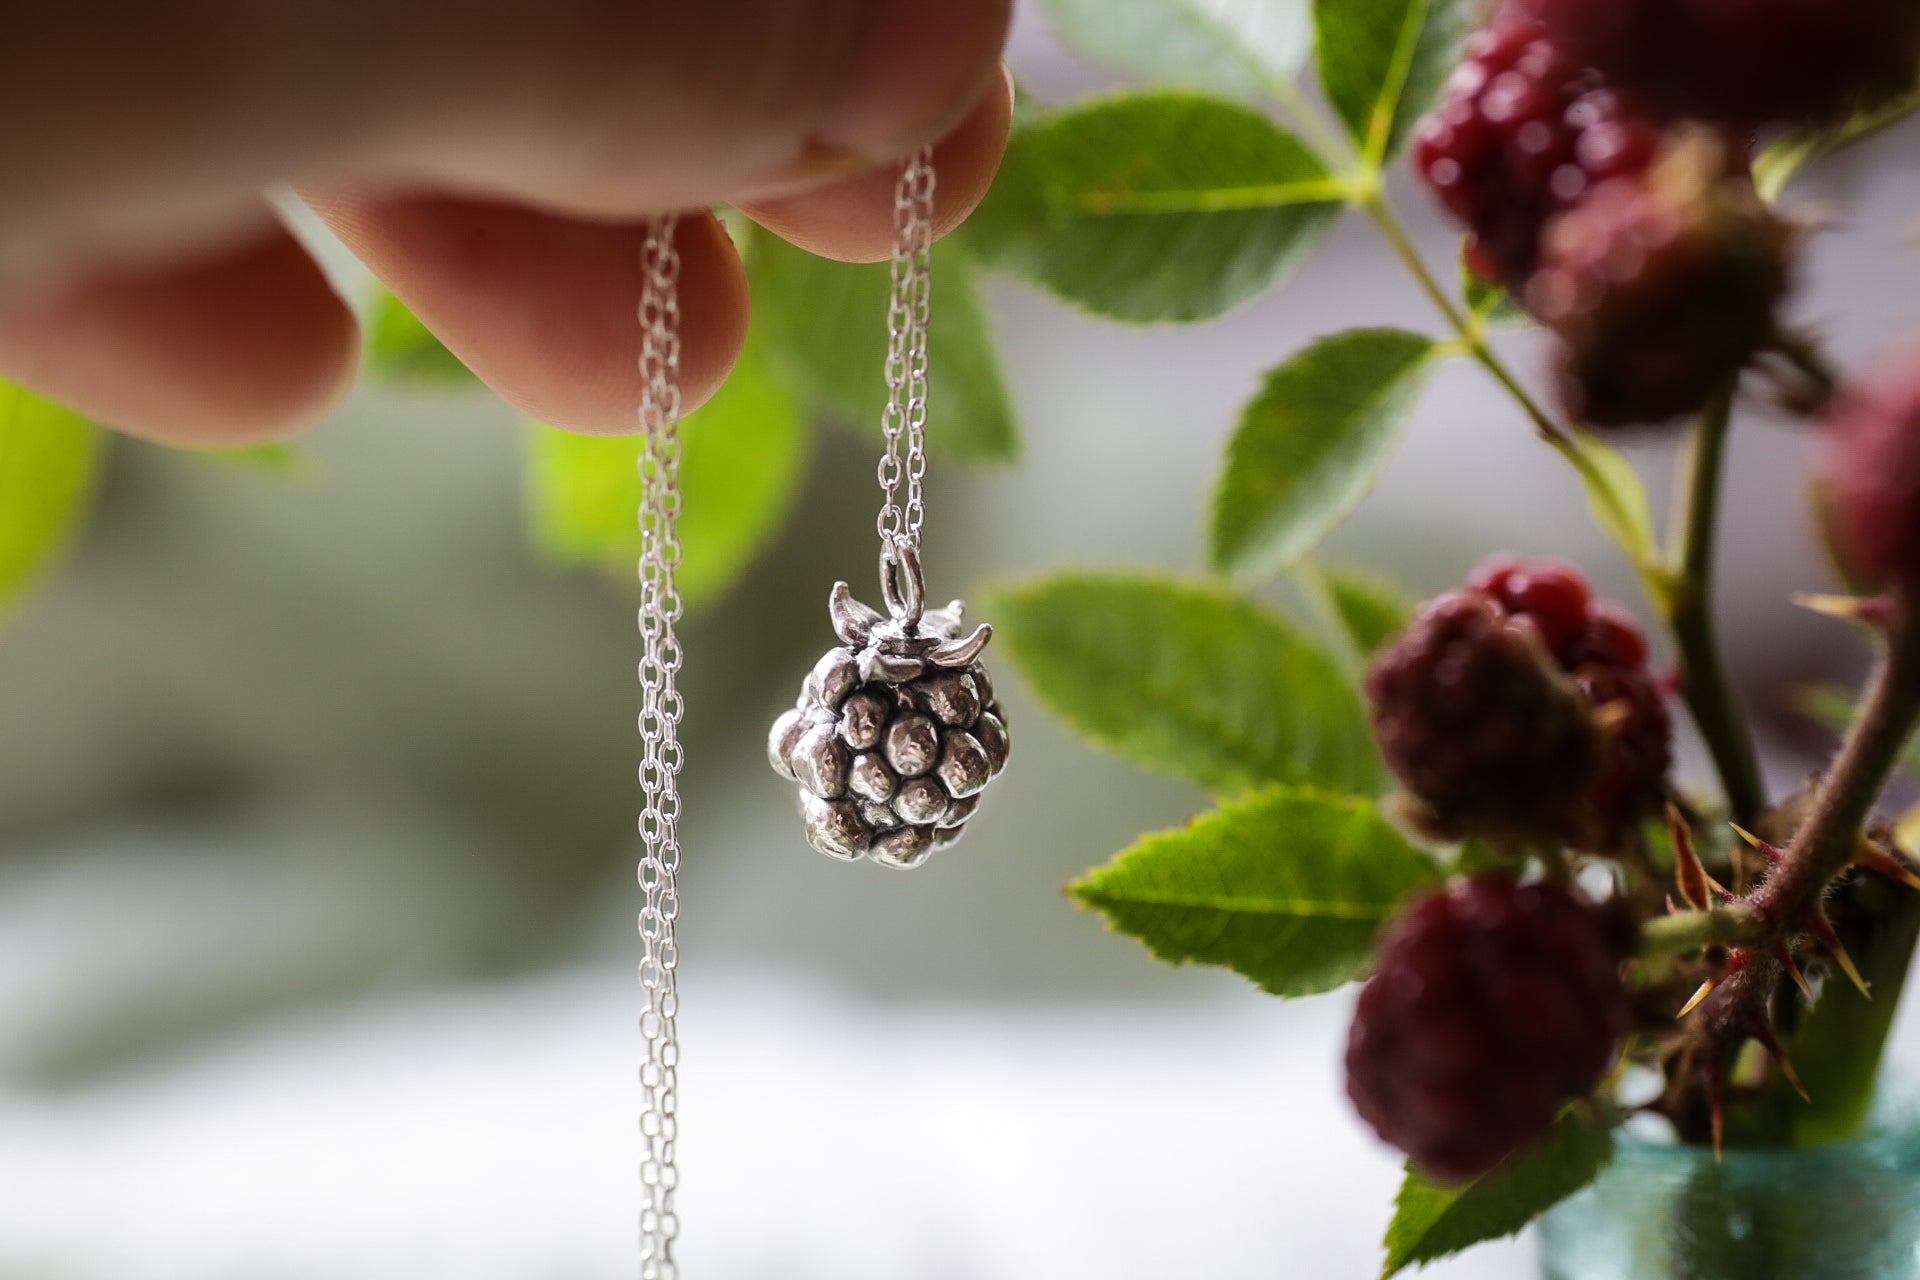 Autumn Blackberry pendant ~ For Healing, Protection & Resilience